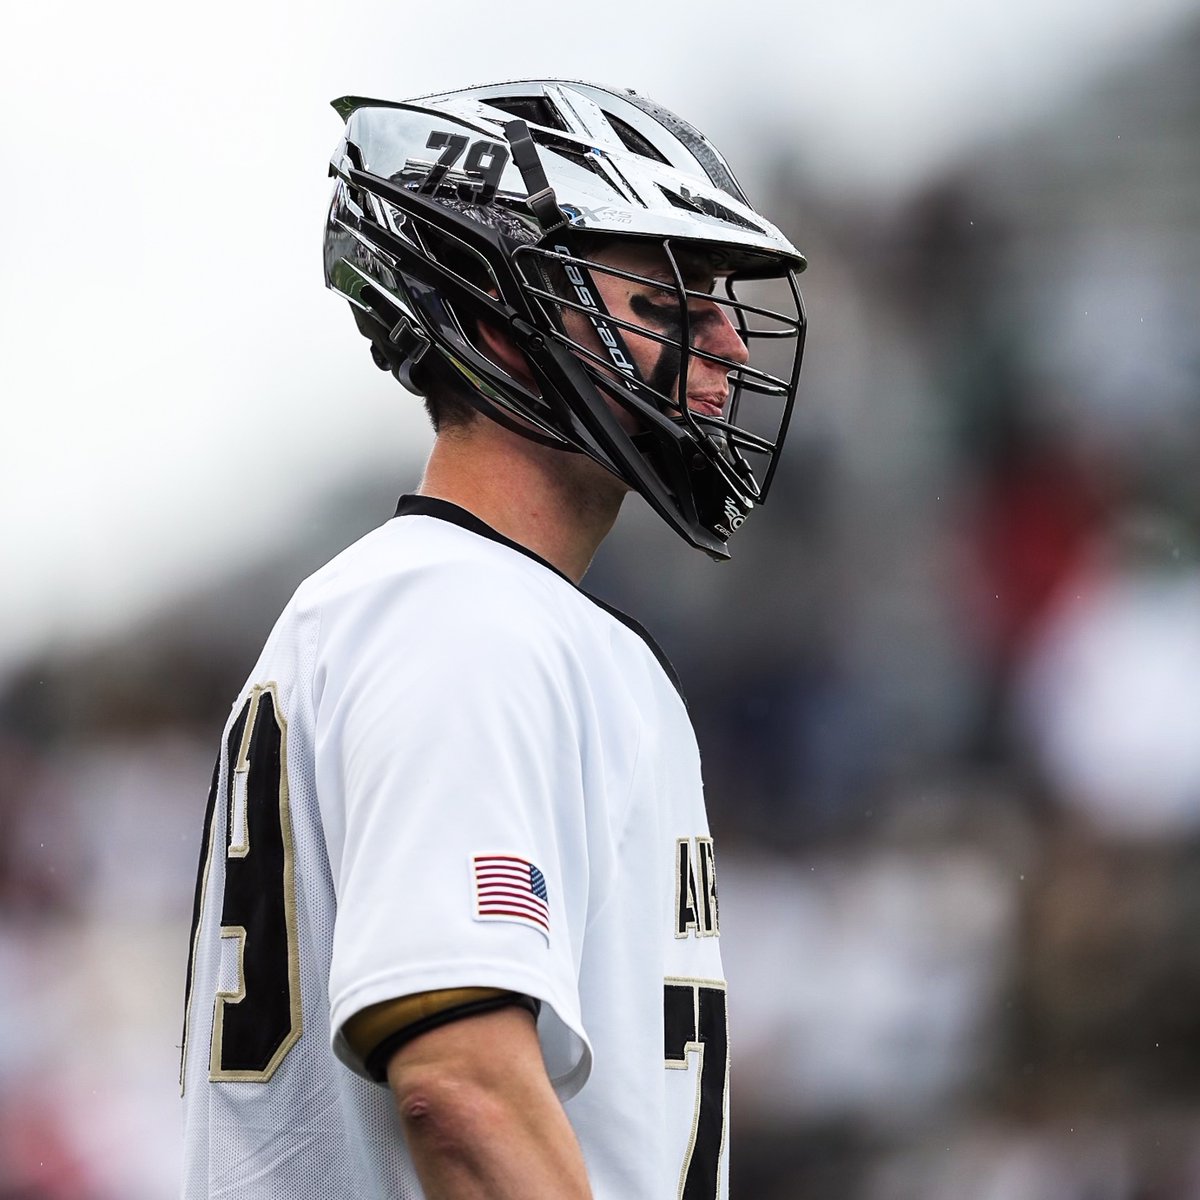 How chaotic is the Patriot League this year? There's currently a SIX-WAY tie for first place in the conference... 1️⃣ @ArmyWP_MLax (4-2) 1️⃣ @NavyMLax (4-2) 1️⃣ @ColgateMLax (4-2) 1️⃣ @TerrierMLAX (4-2) 1️⃣ @LoyolaMLAX (4-2) 1️⃣ @LehighLacrosse (4-2)